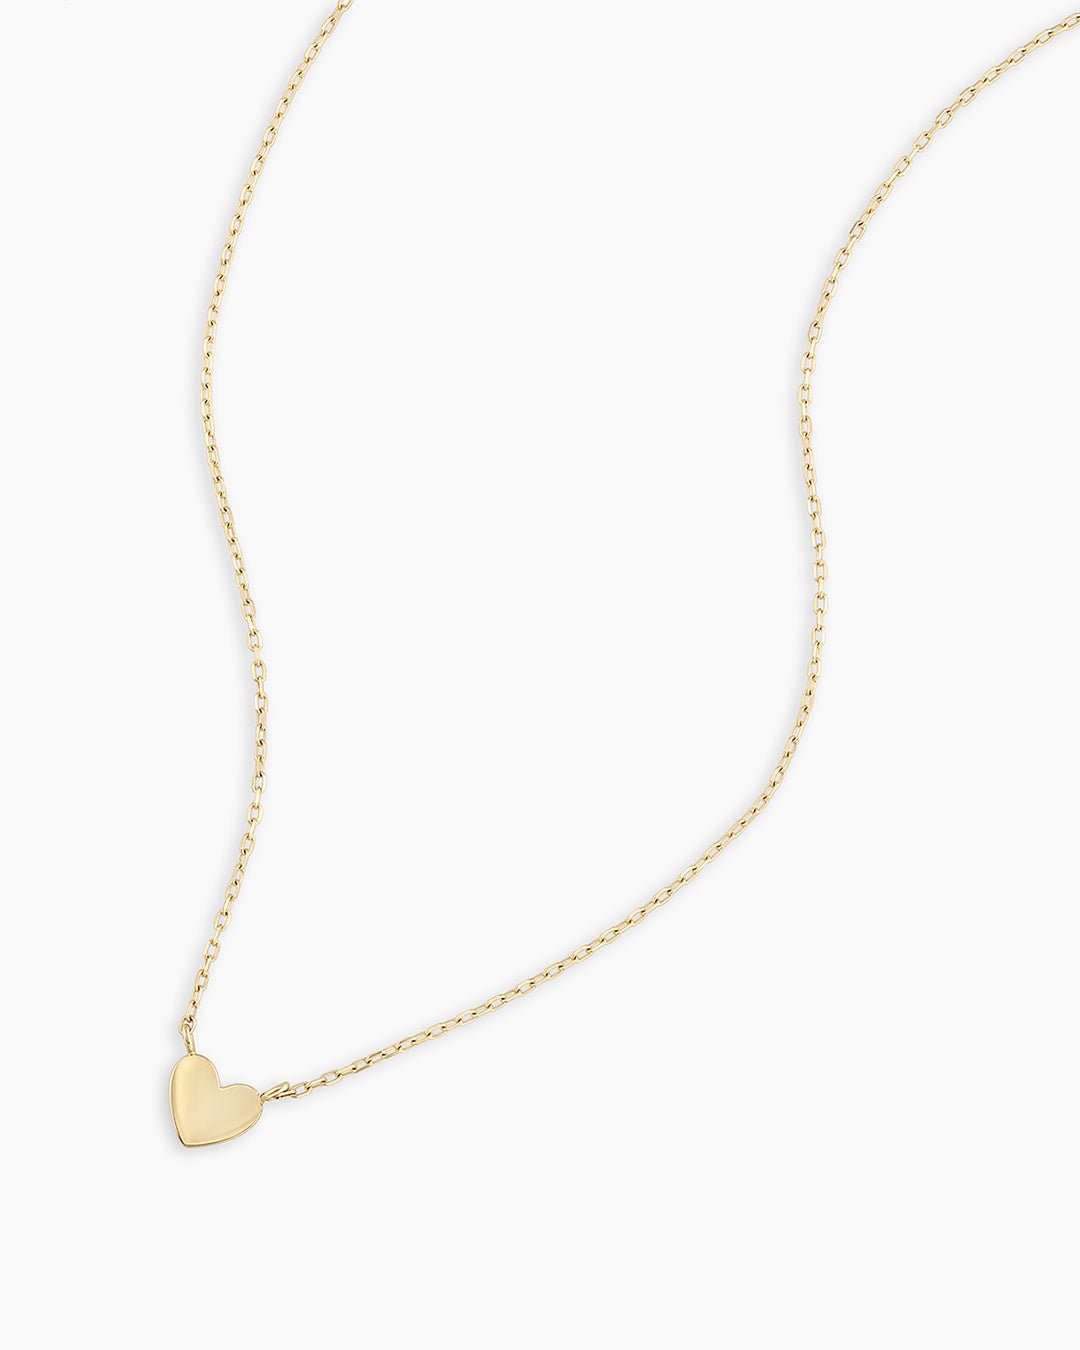 14K Solid White Gold Heart Necklace Minimalist Heart 